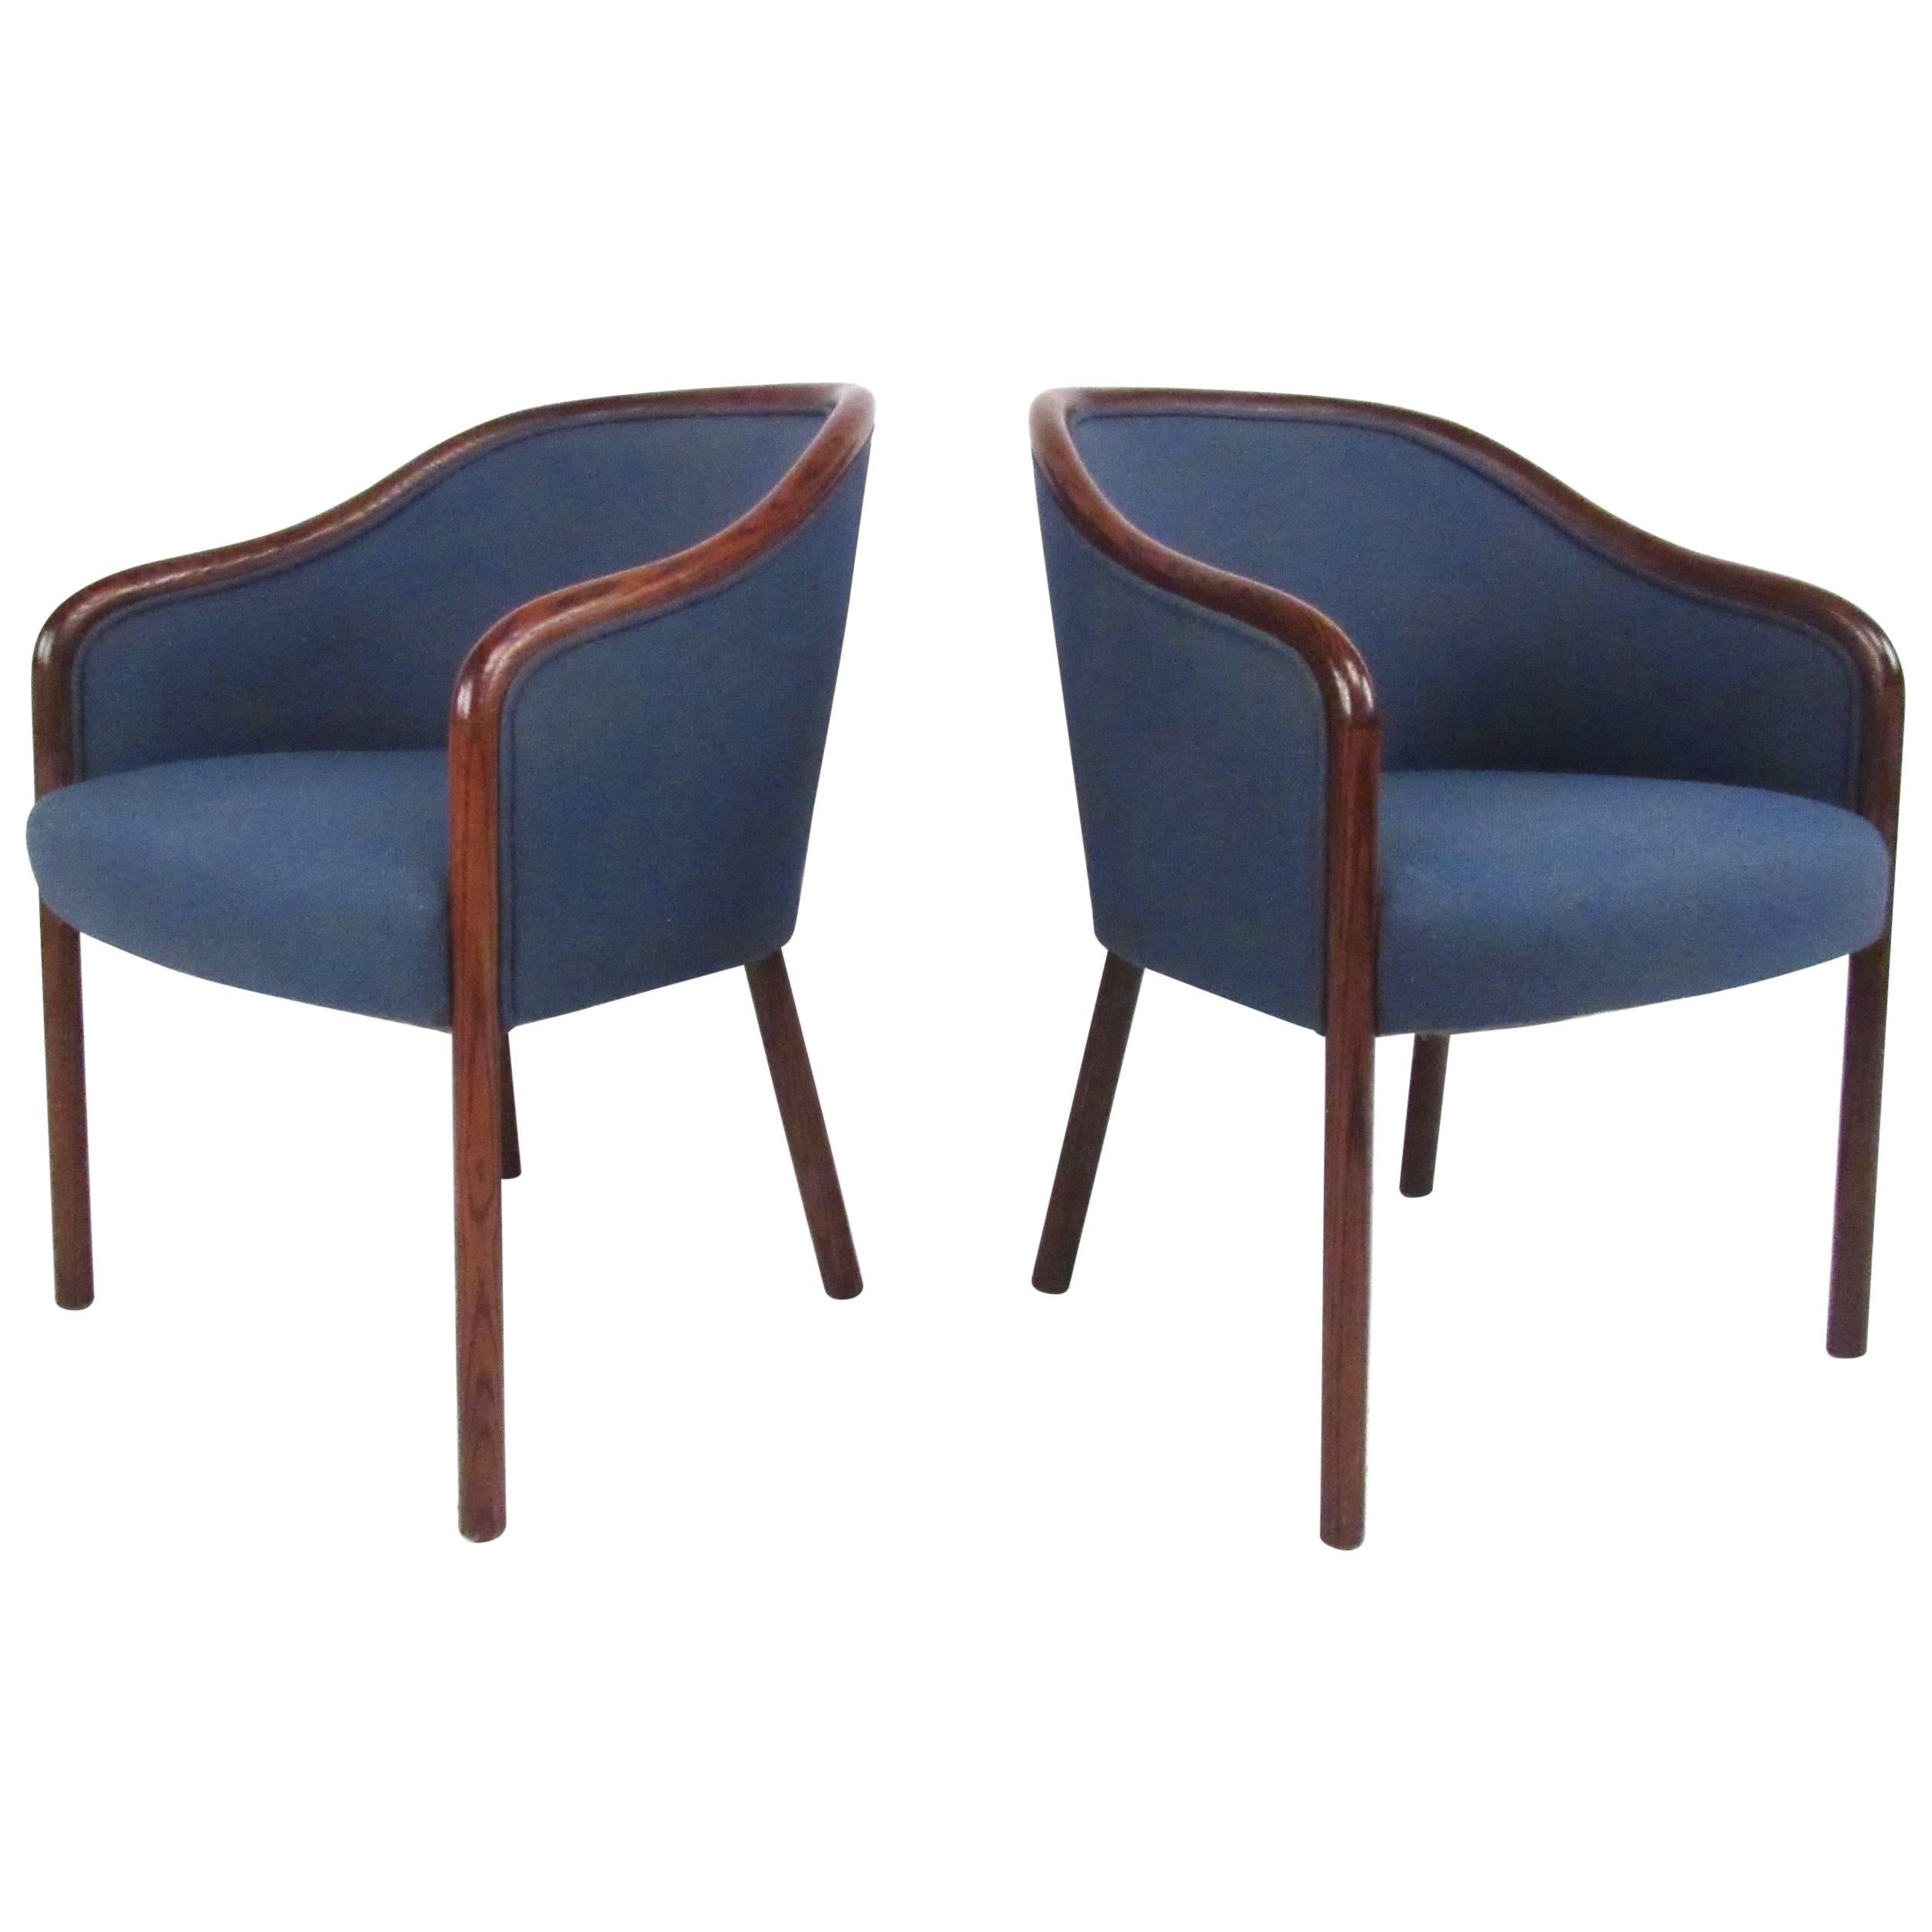 Pair of Mid-Century Modern Rosewood Side Chairs